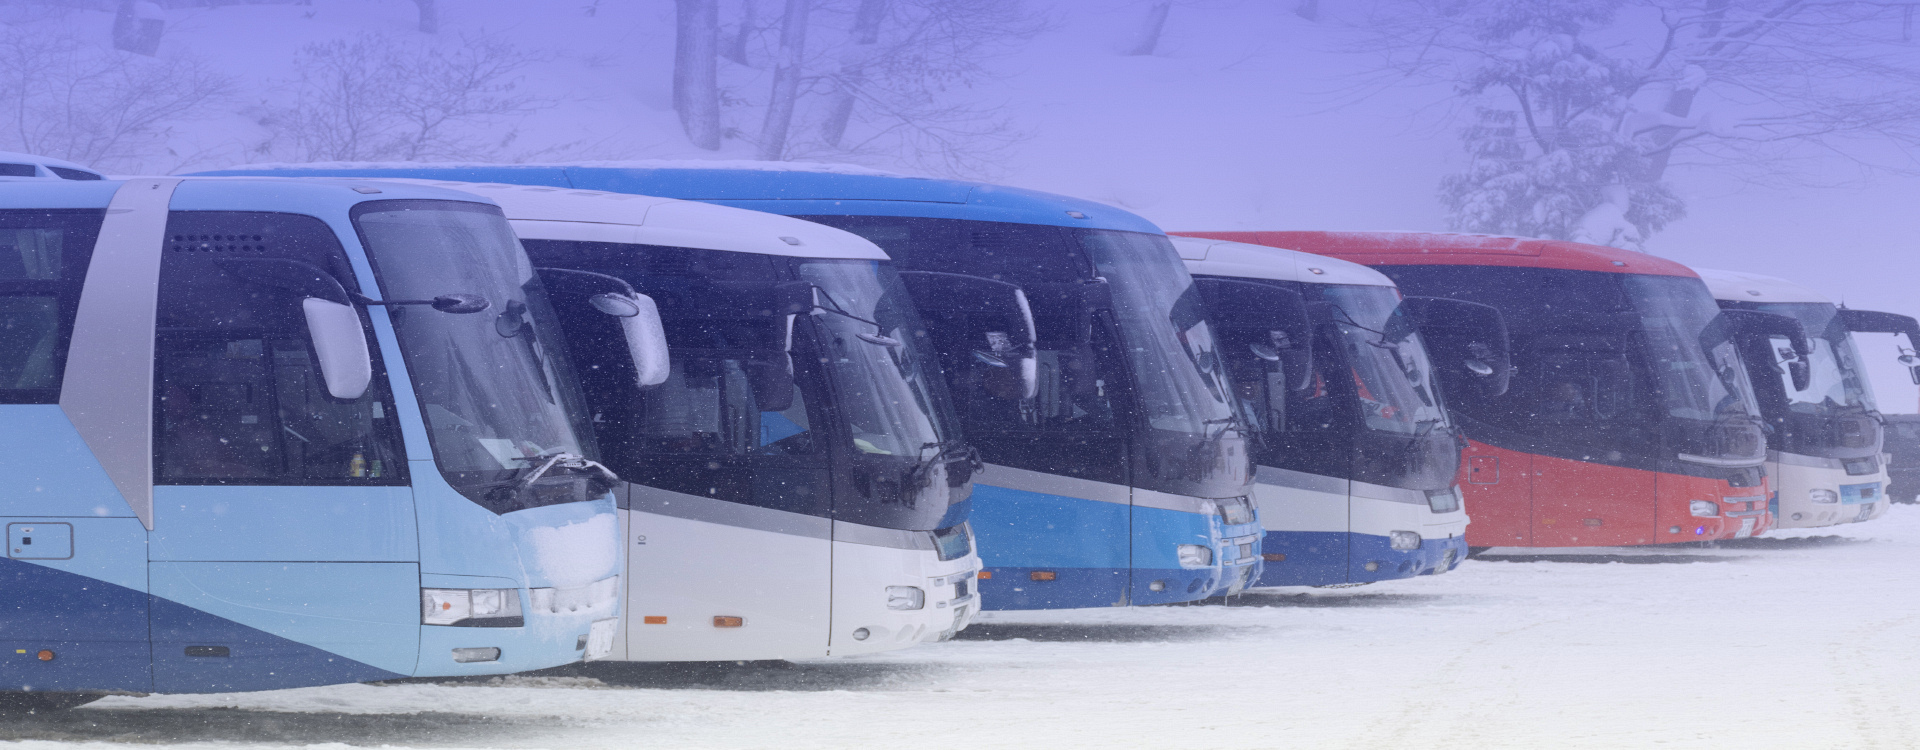 Buses lined up in the Snow